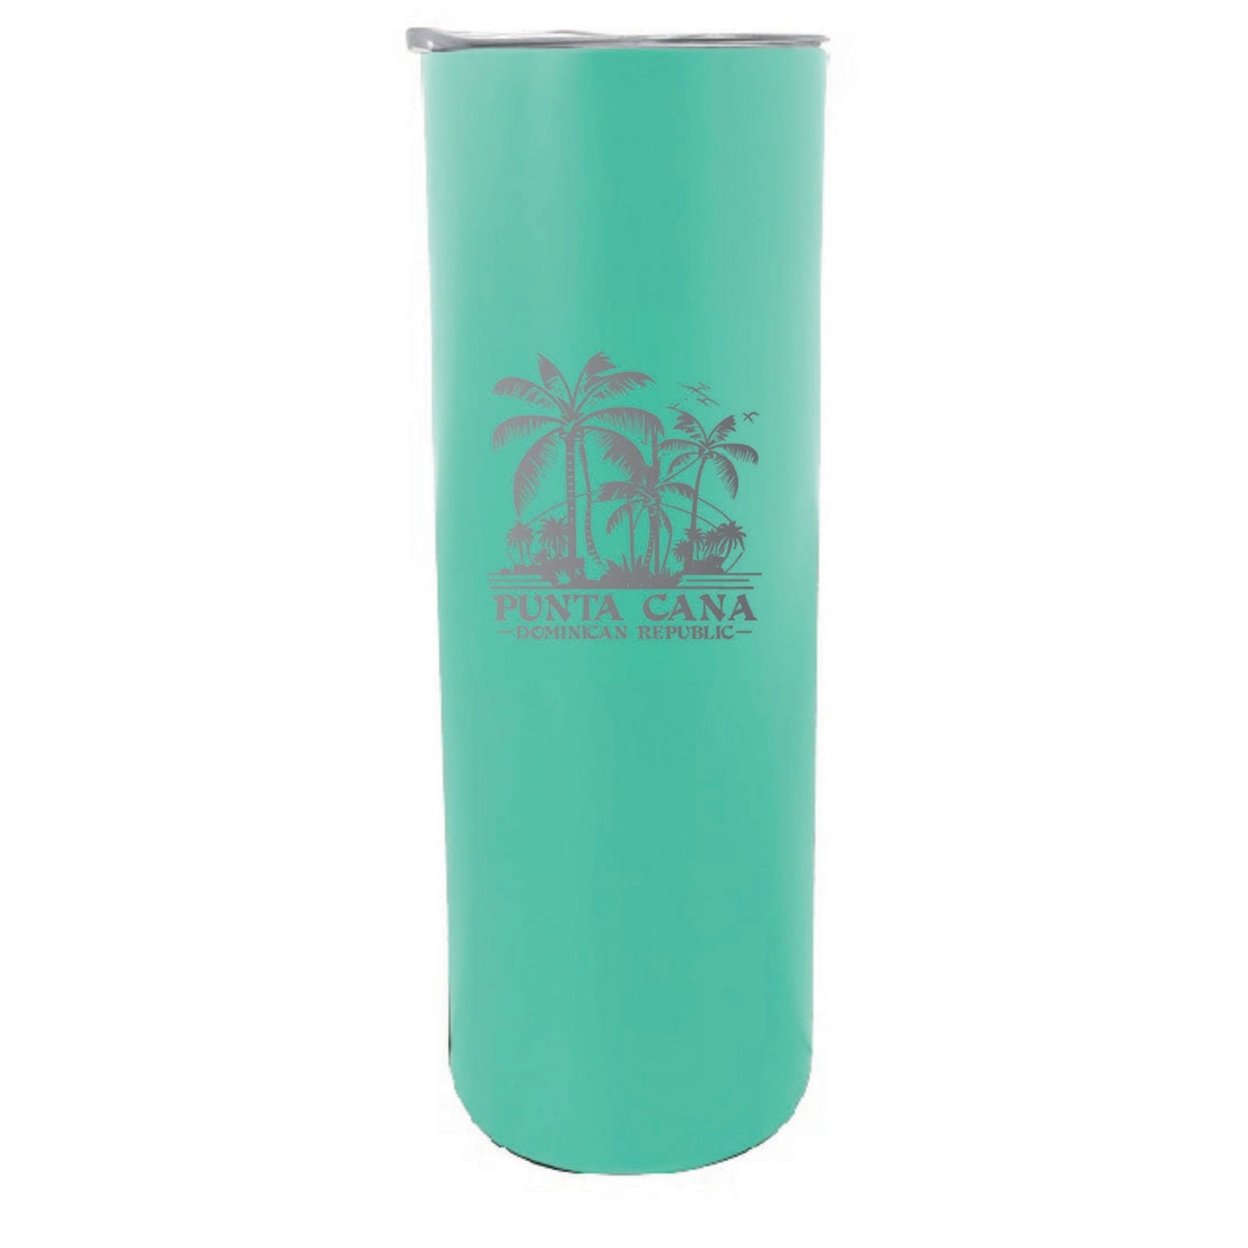 Punta Cana Dominican Republic Souvenir 20 Oz Insulated Stainless Steel Skinny Tumbler Etched - Seafoam, PALMS